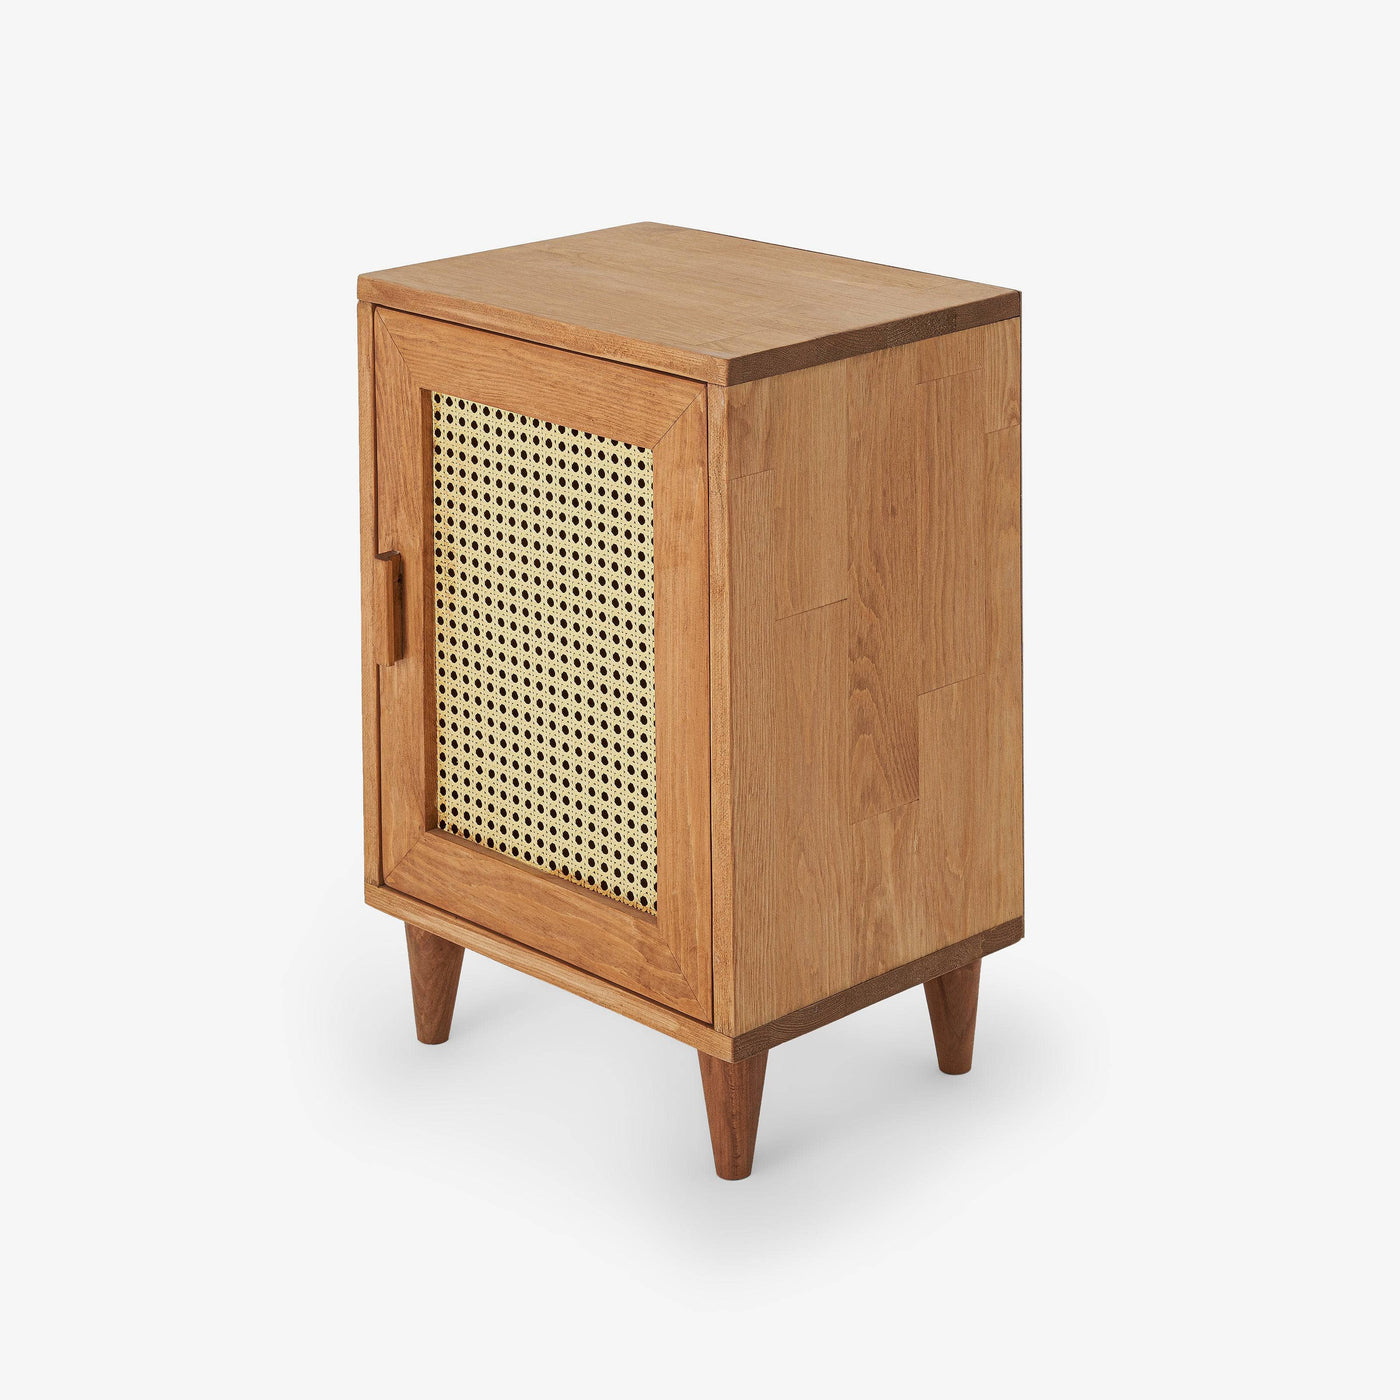 Rattan Bedside Table, 30x40x58 cm, Natural 6